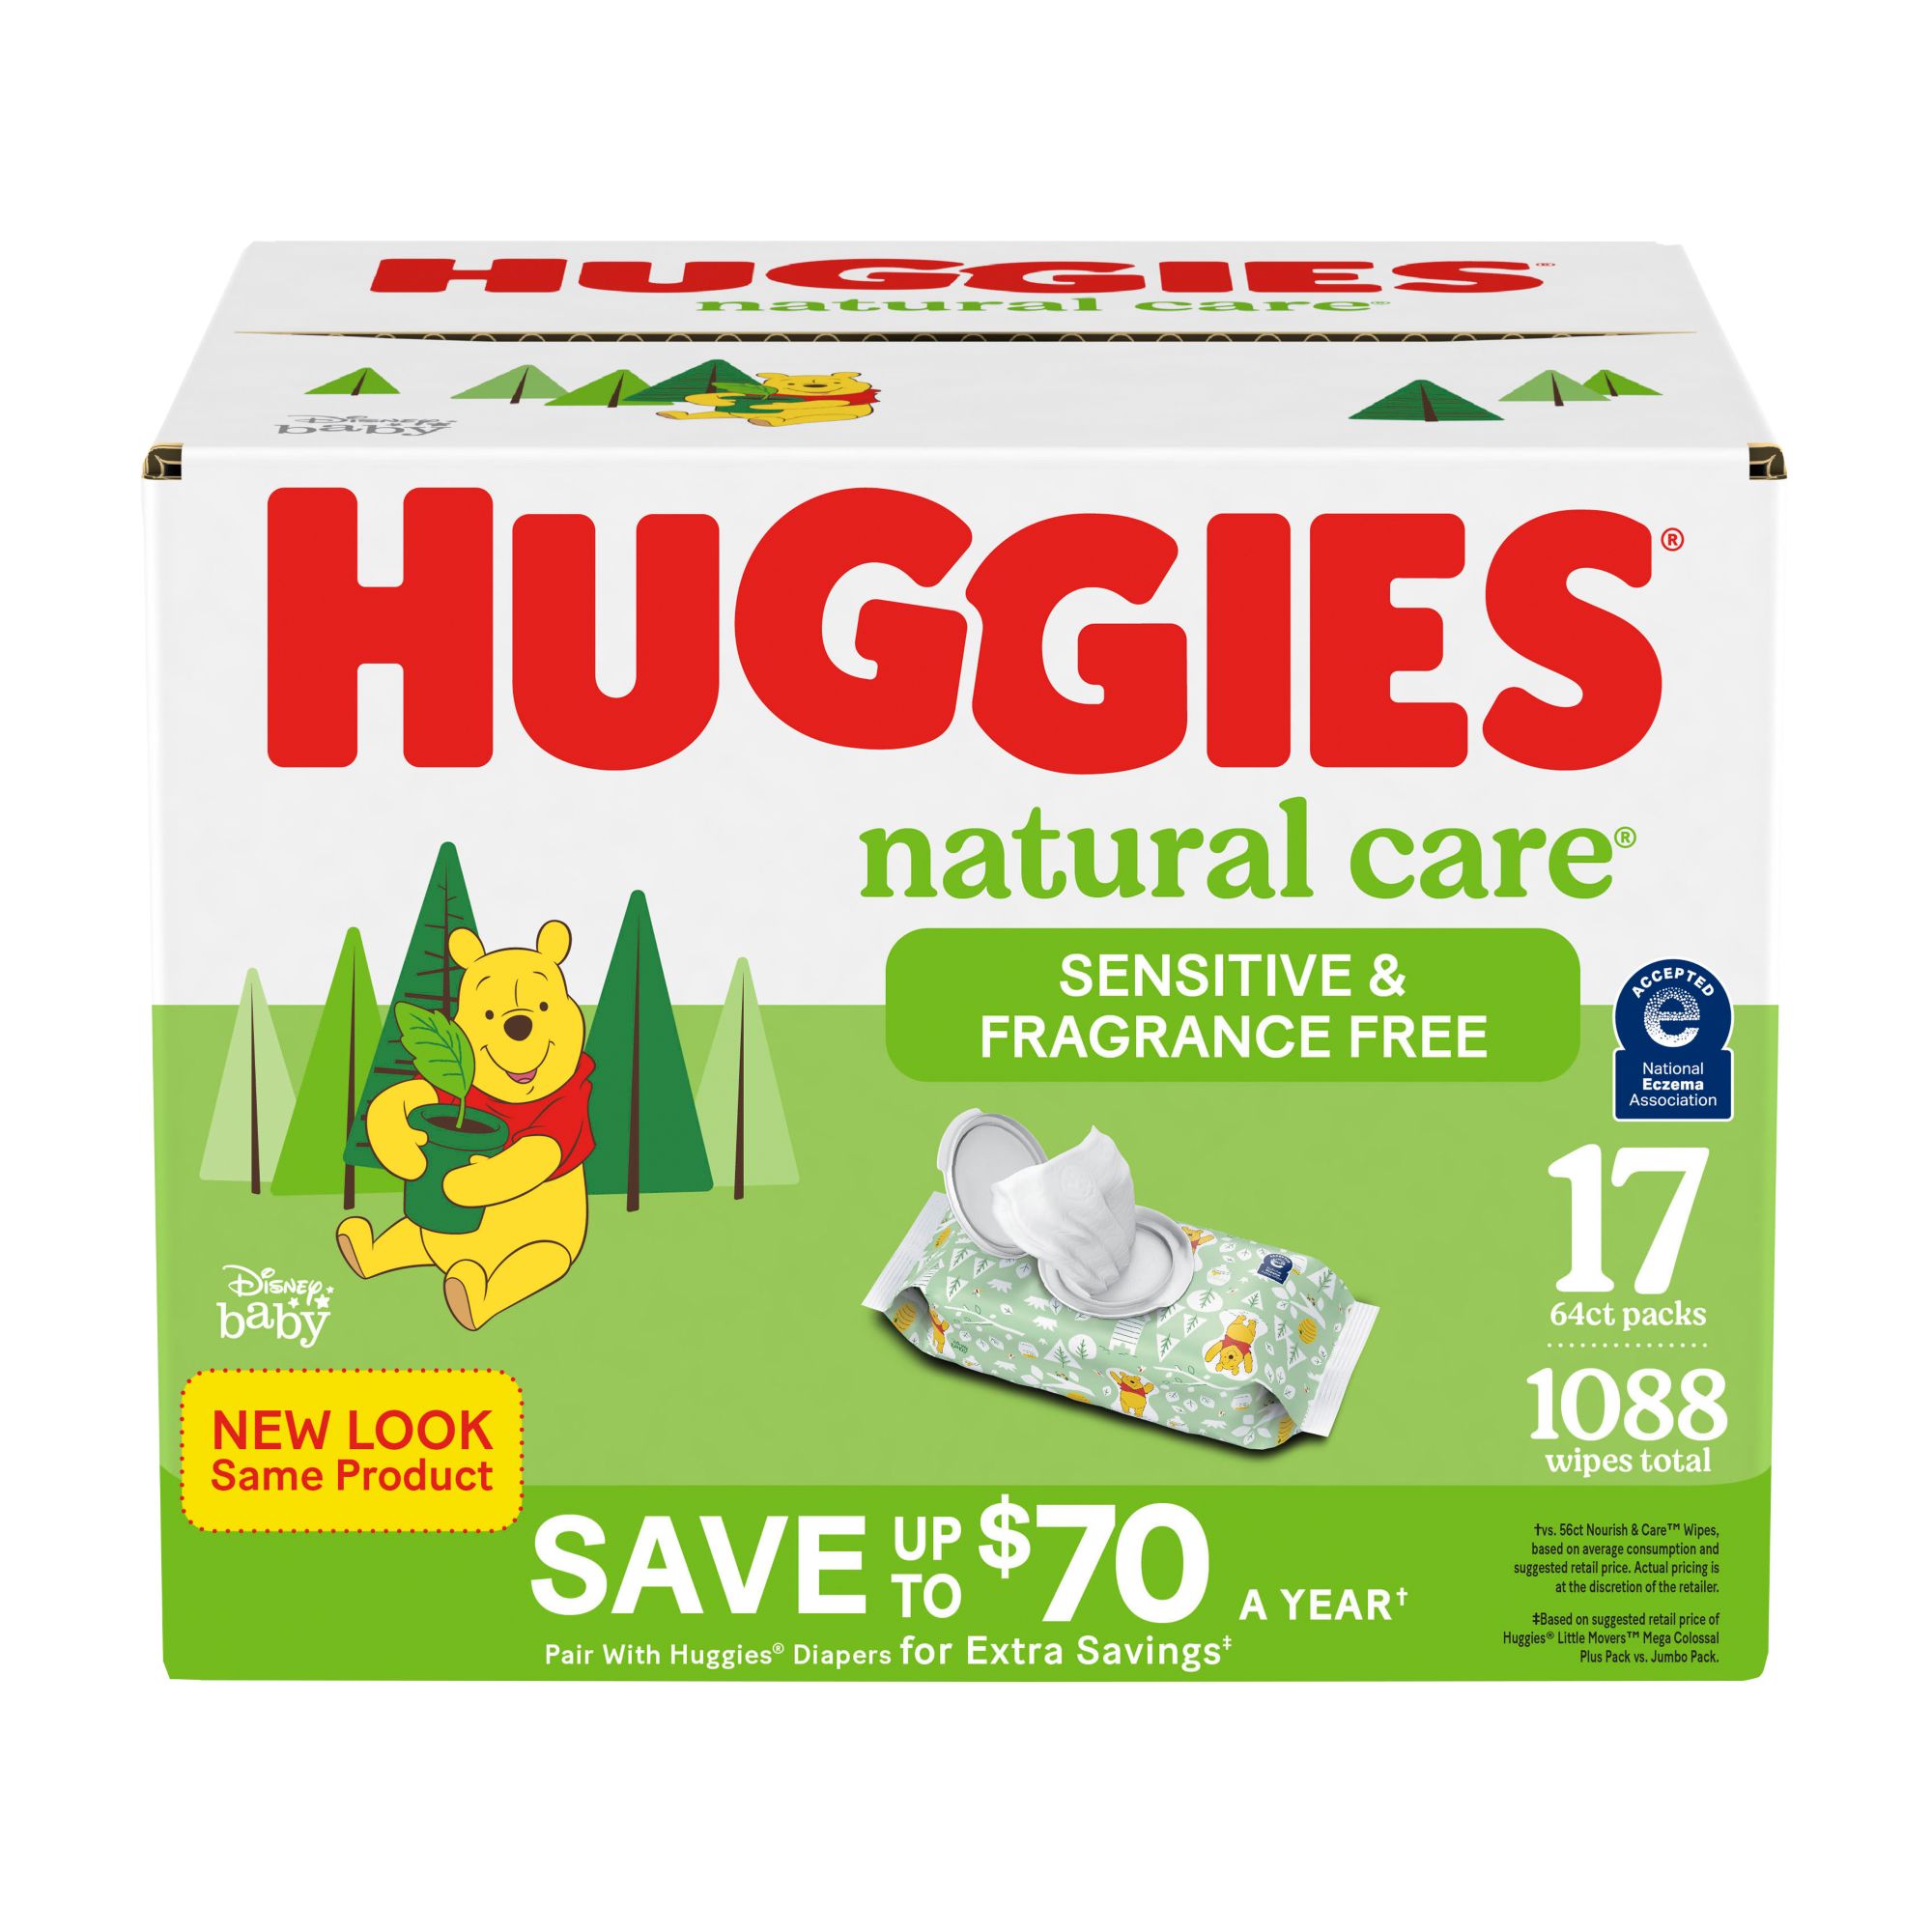 WaterWipes Adult Care Hygiene Wipes, 90ct